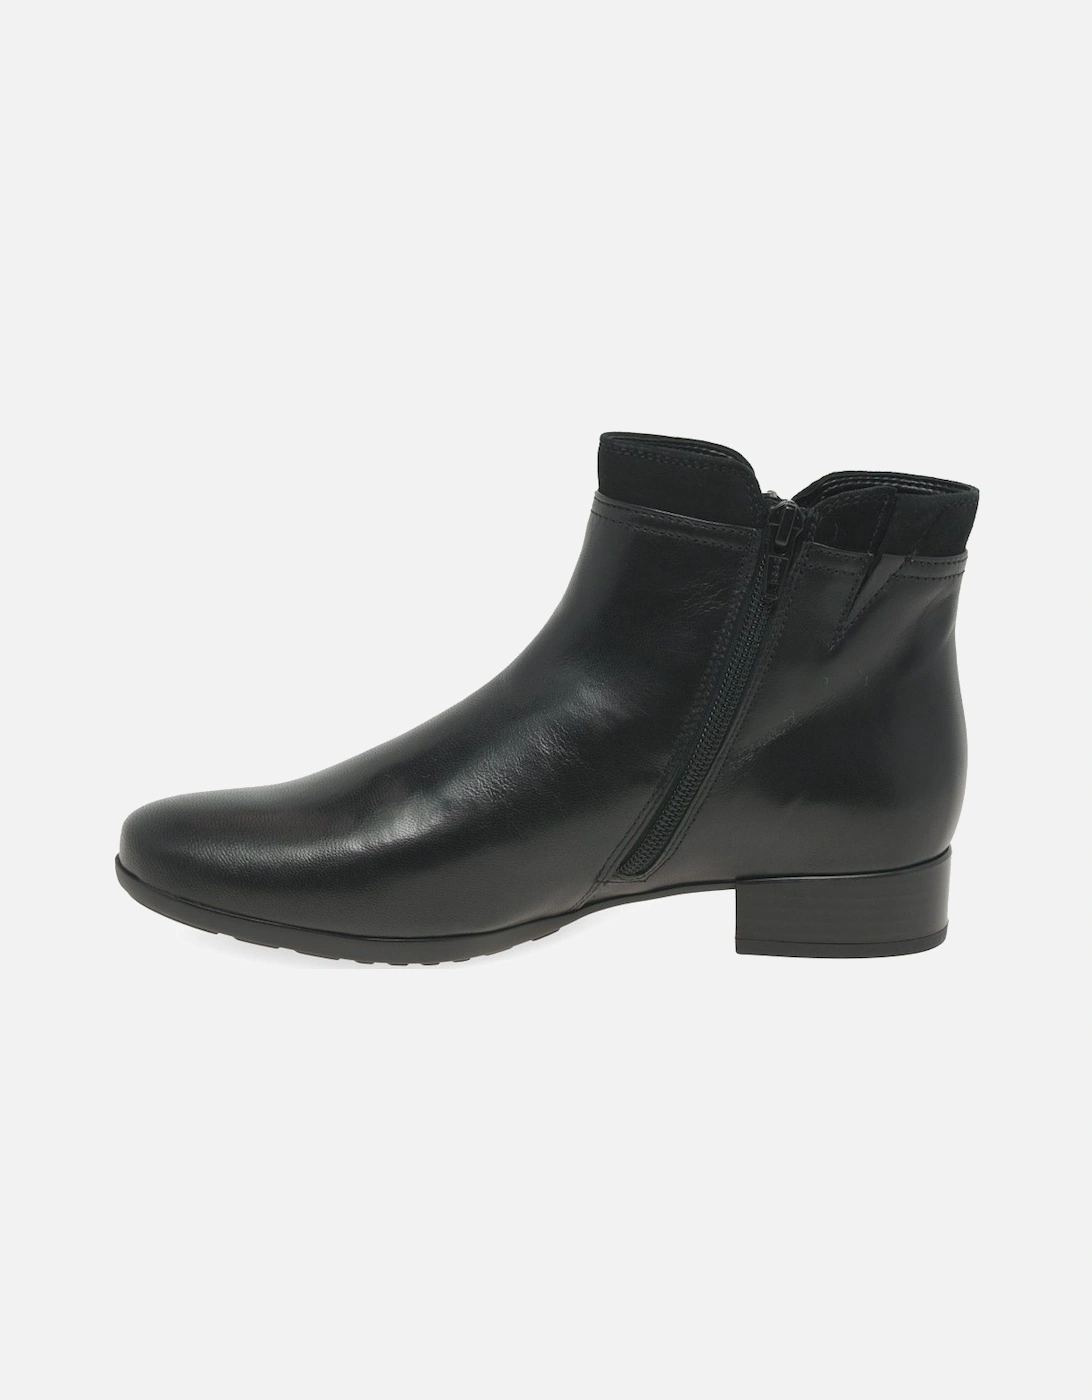 Briano Womens Ankle Boots